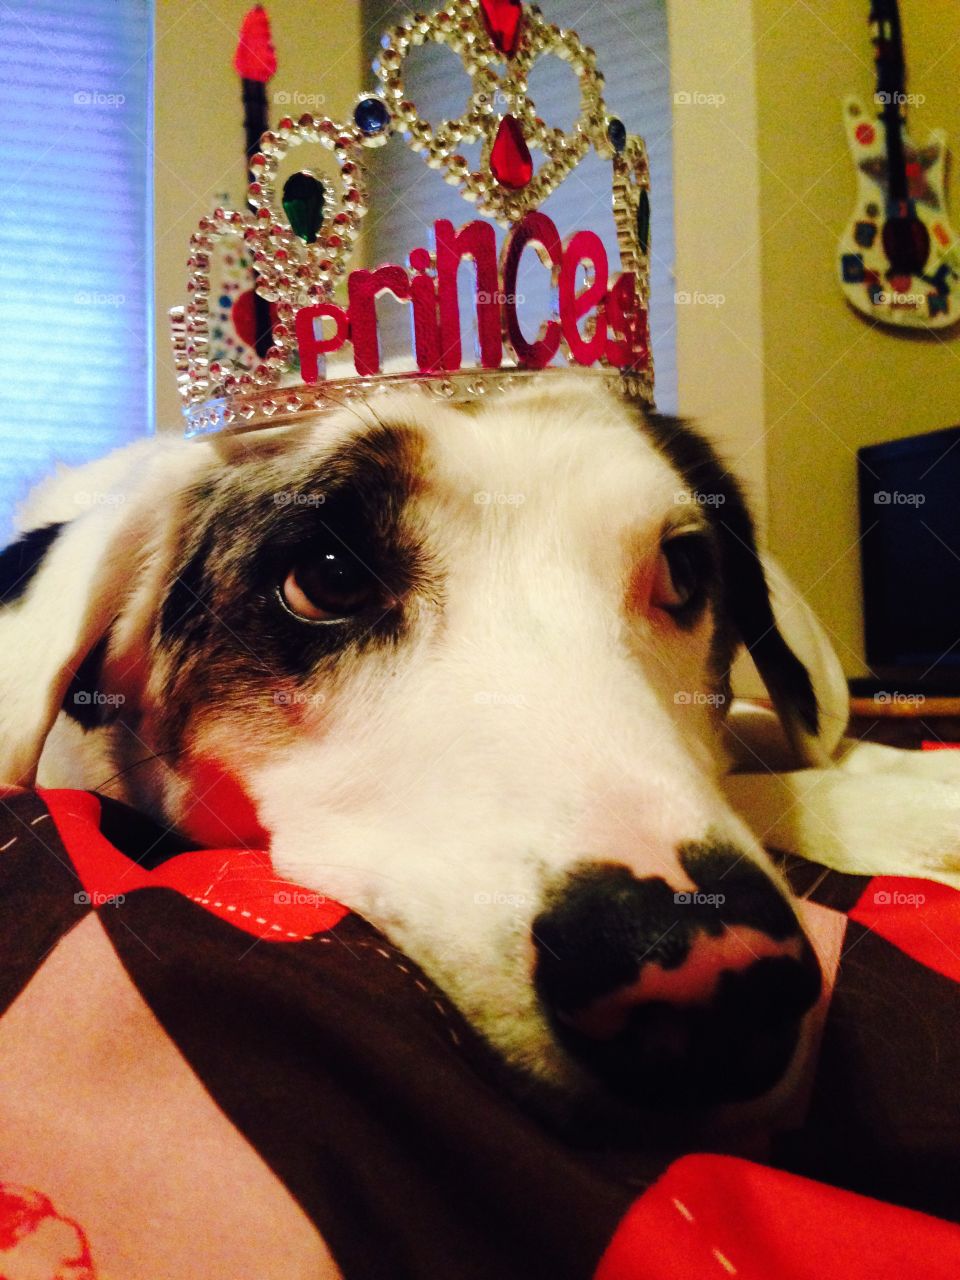 He'll be her Princess . Make dog wearing a crown 